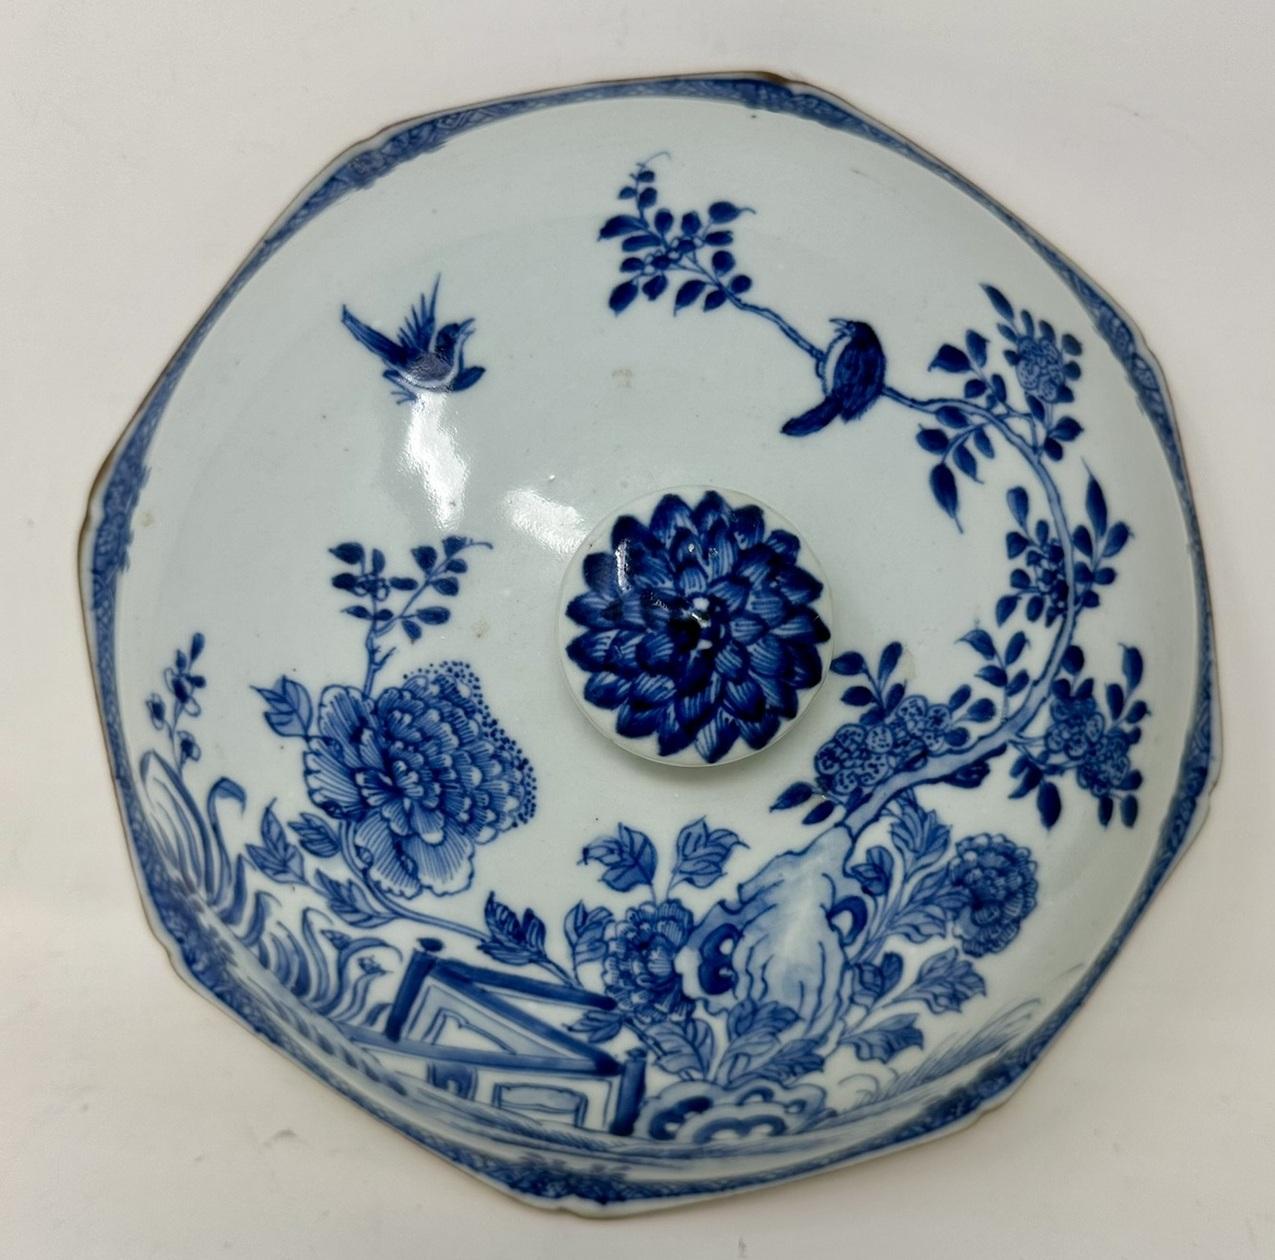 18th Century Antique Chinese Export Porcelain Blue White Chien Lung Soup Tureen Centerpiece For Sale